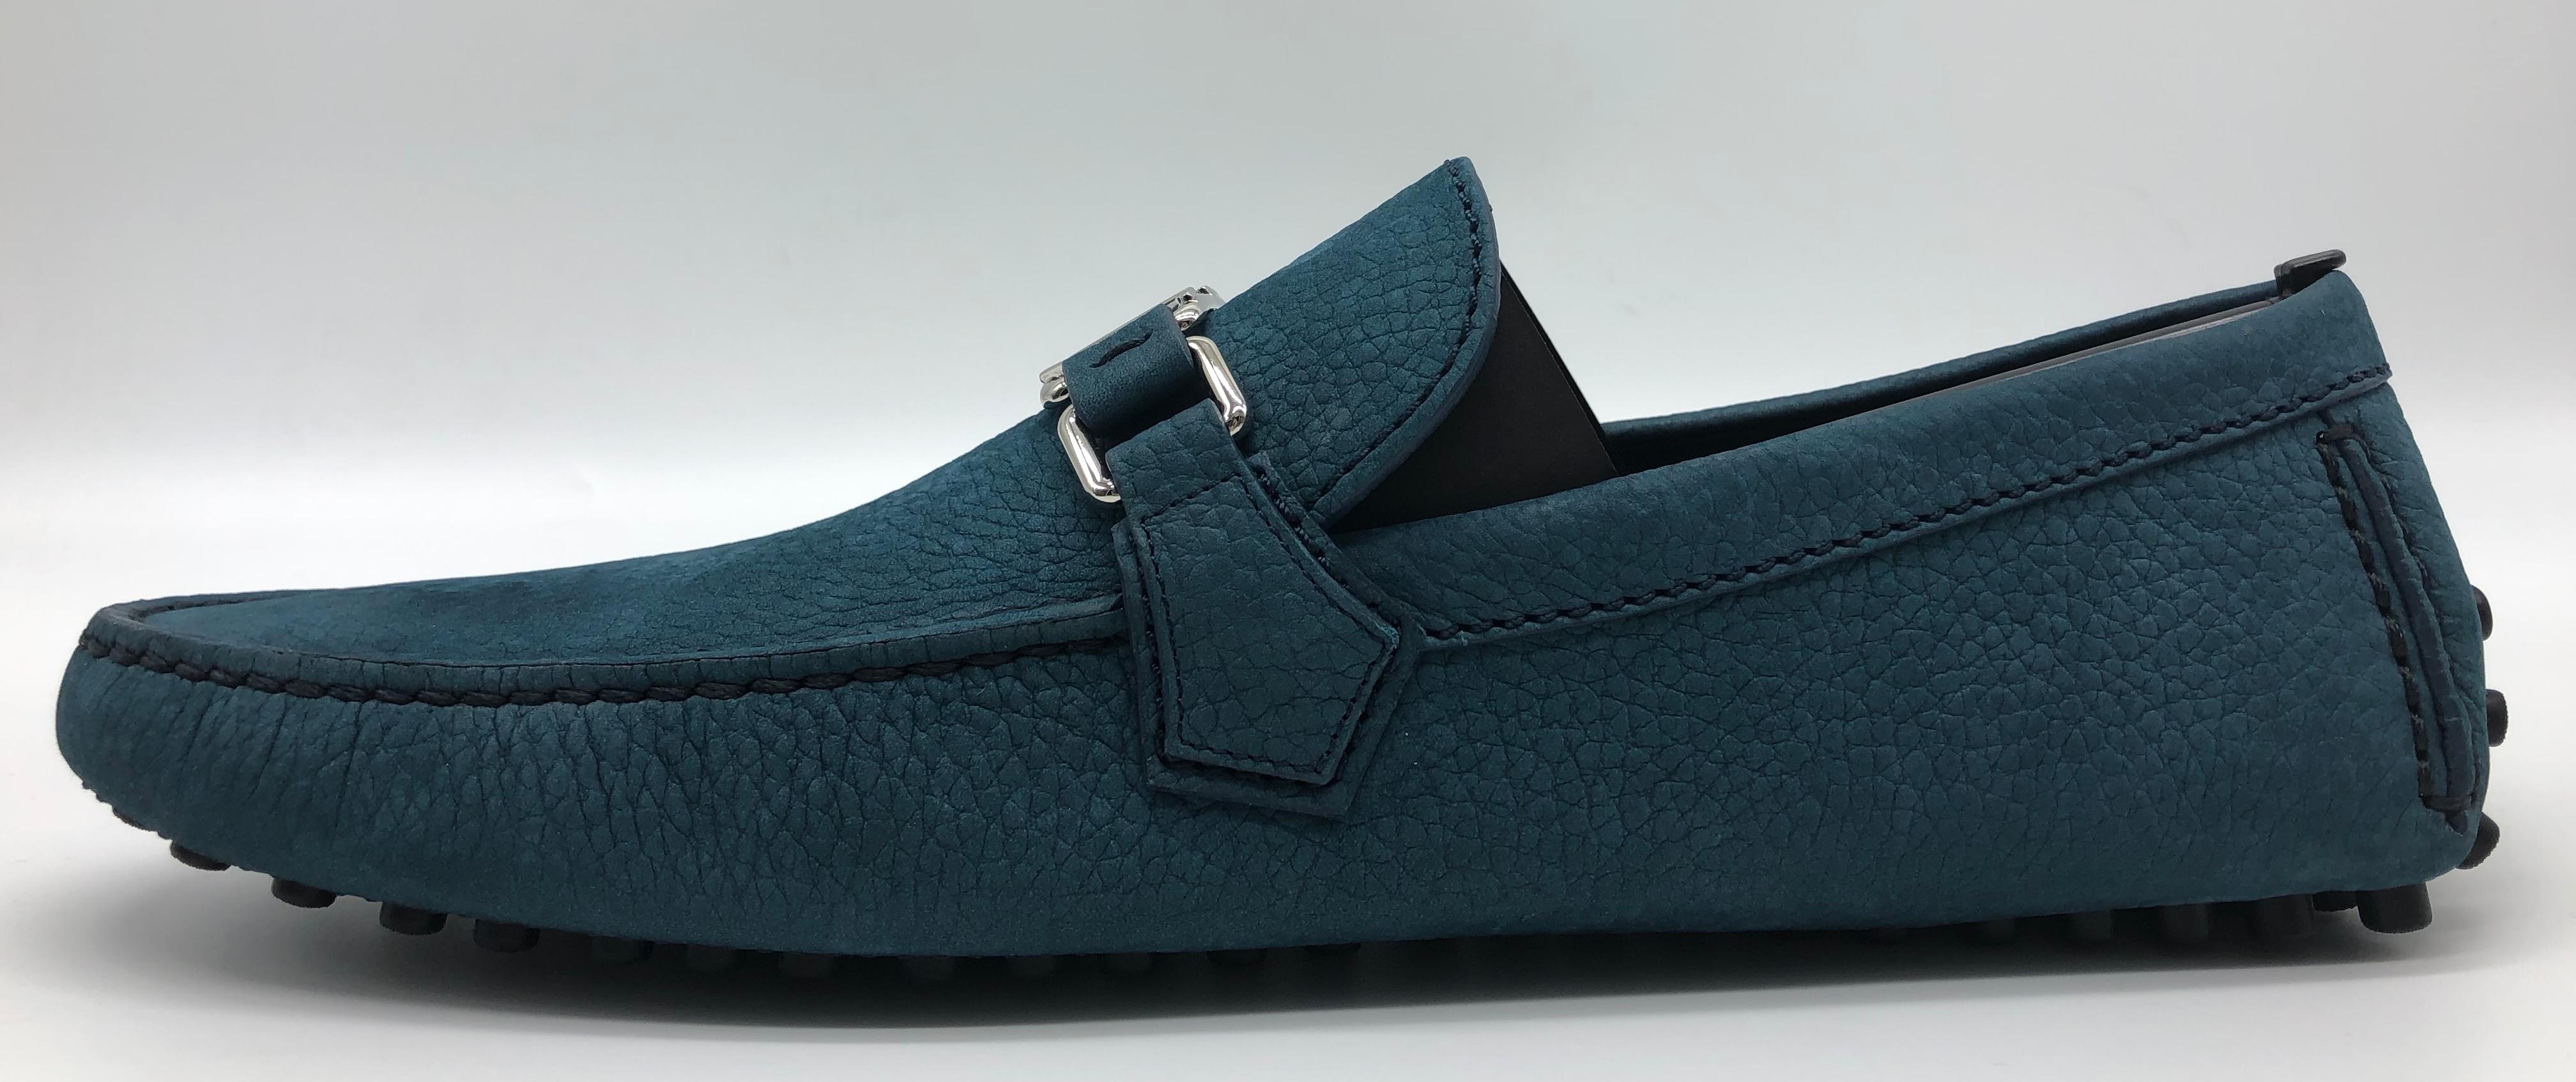 Louis Vuitton loafers for men in blue suede .
Model: Hockenheim .
Size : 10 (44,5) 
Condition: New, never used 
Comes with box.